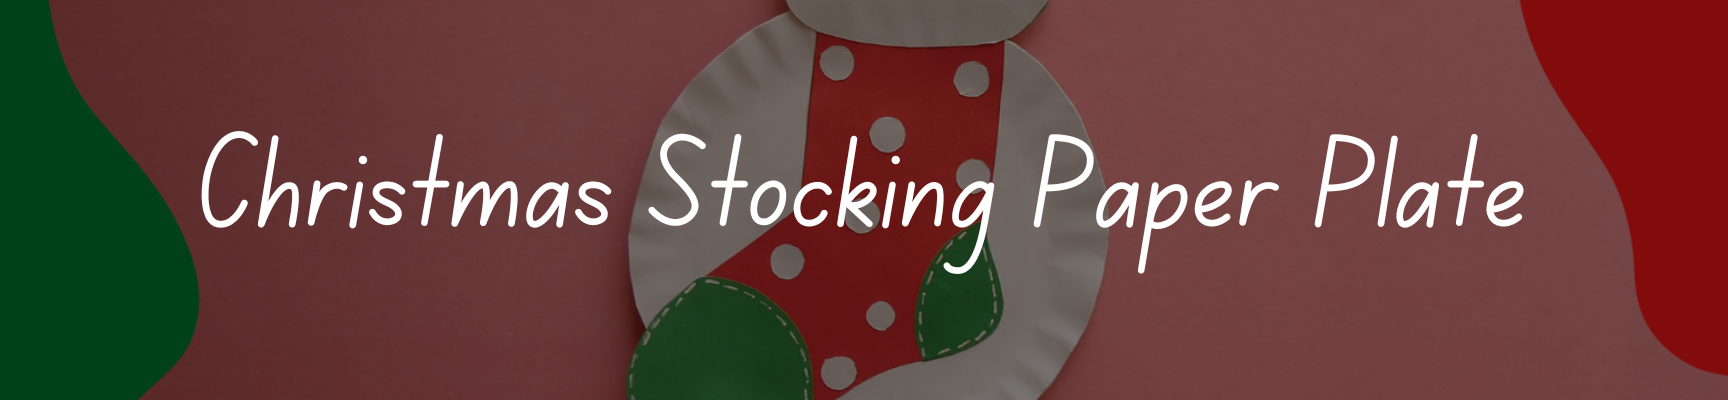 Christmas Stocking Paper Plate